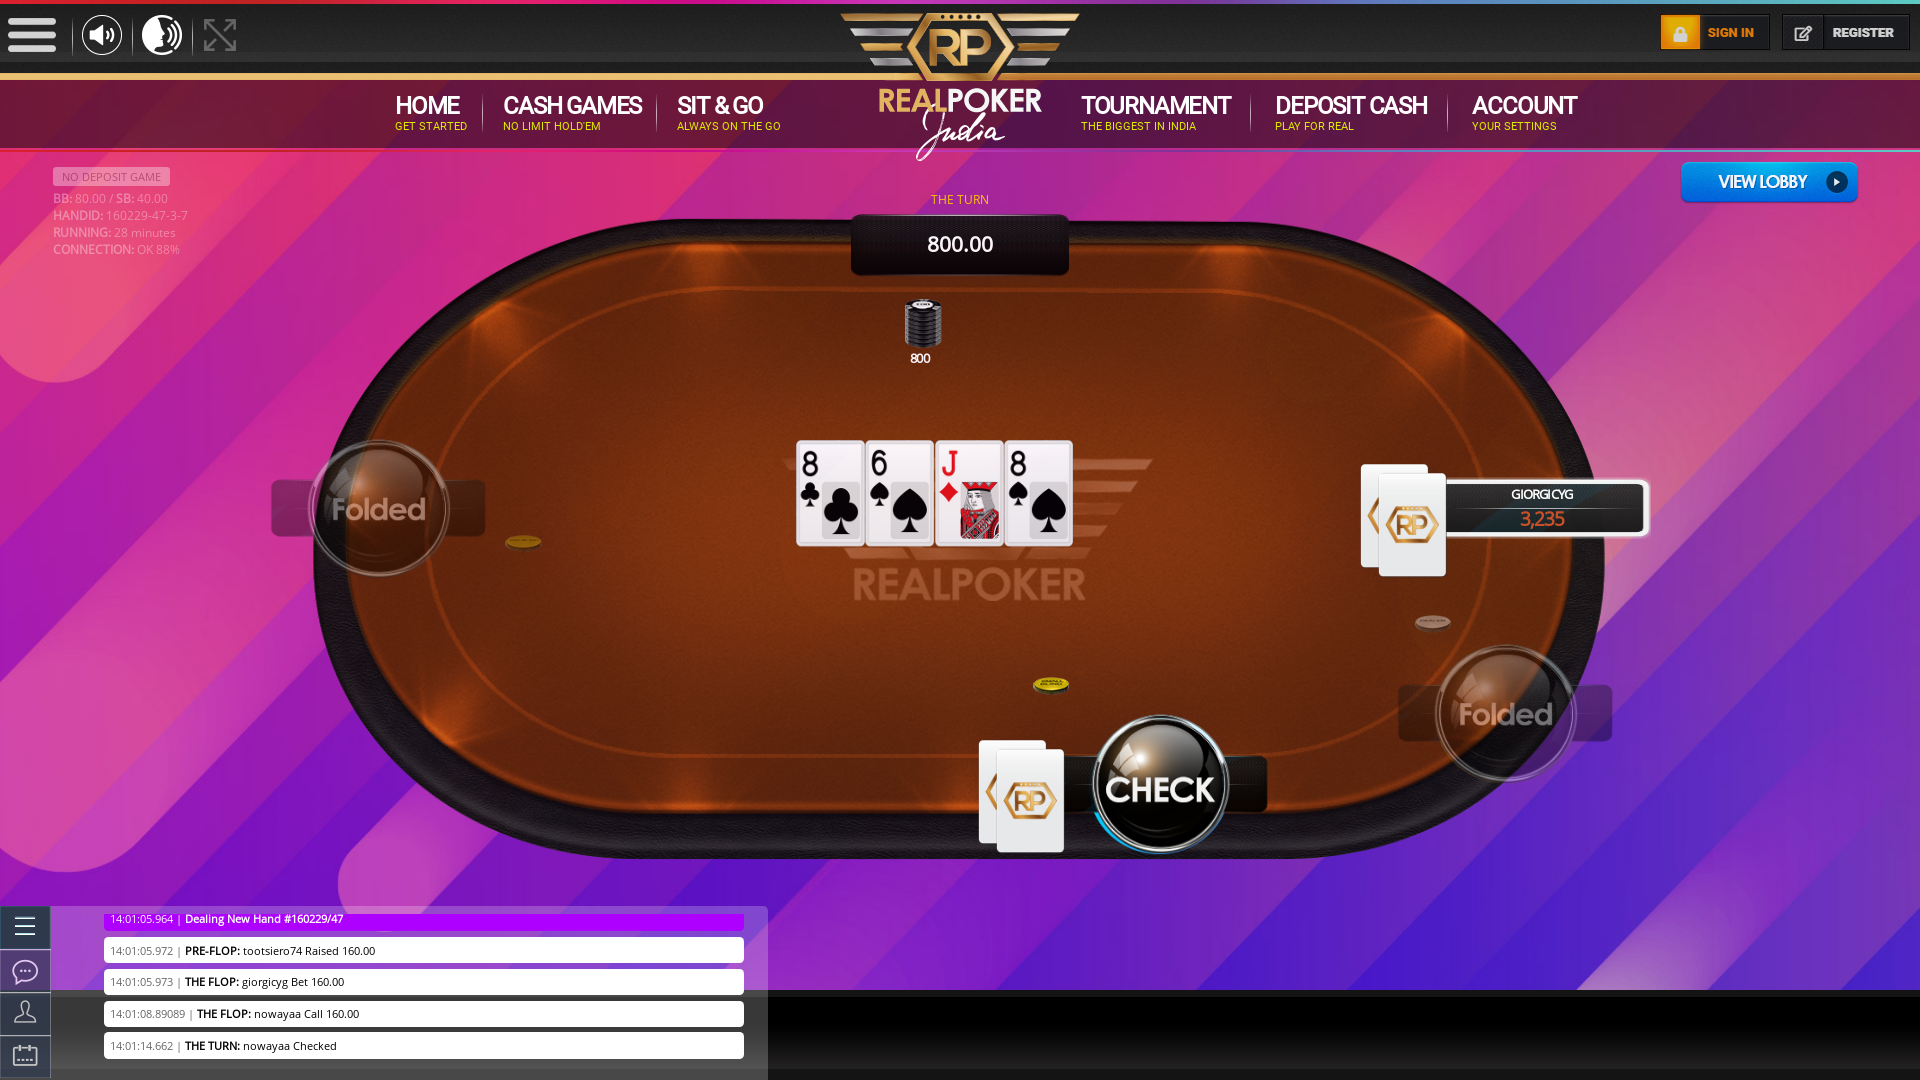 Indian online poker on a 10 player table in the 28th minute match up